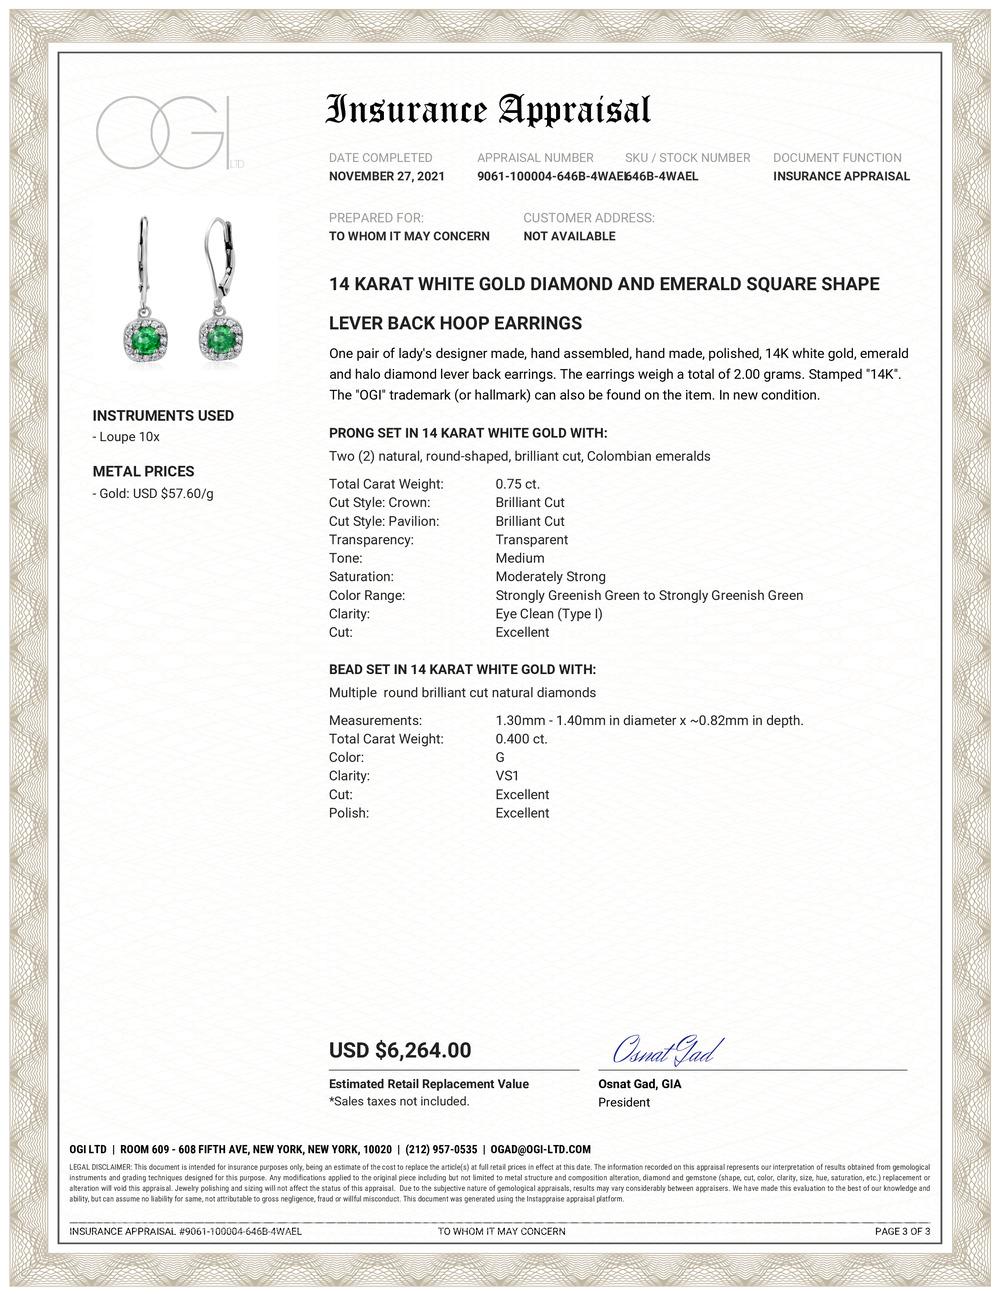 Fourteen karat white gold emerald and diamond lever back hoop earrings 
Two round emerald weighing 0.75
Diamond weighing 0.40 carat
Earrings measuring 1